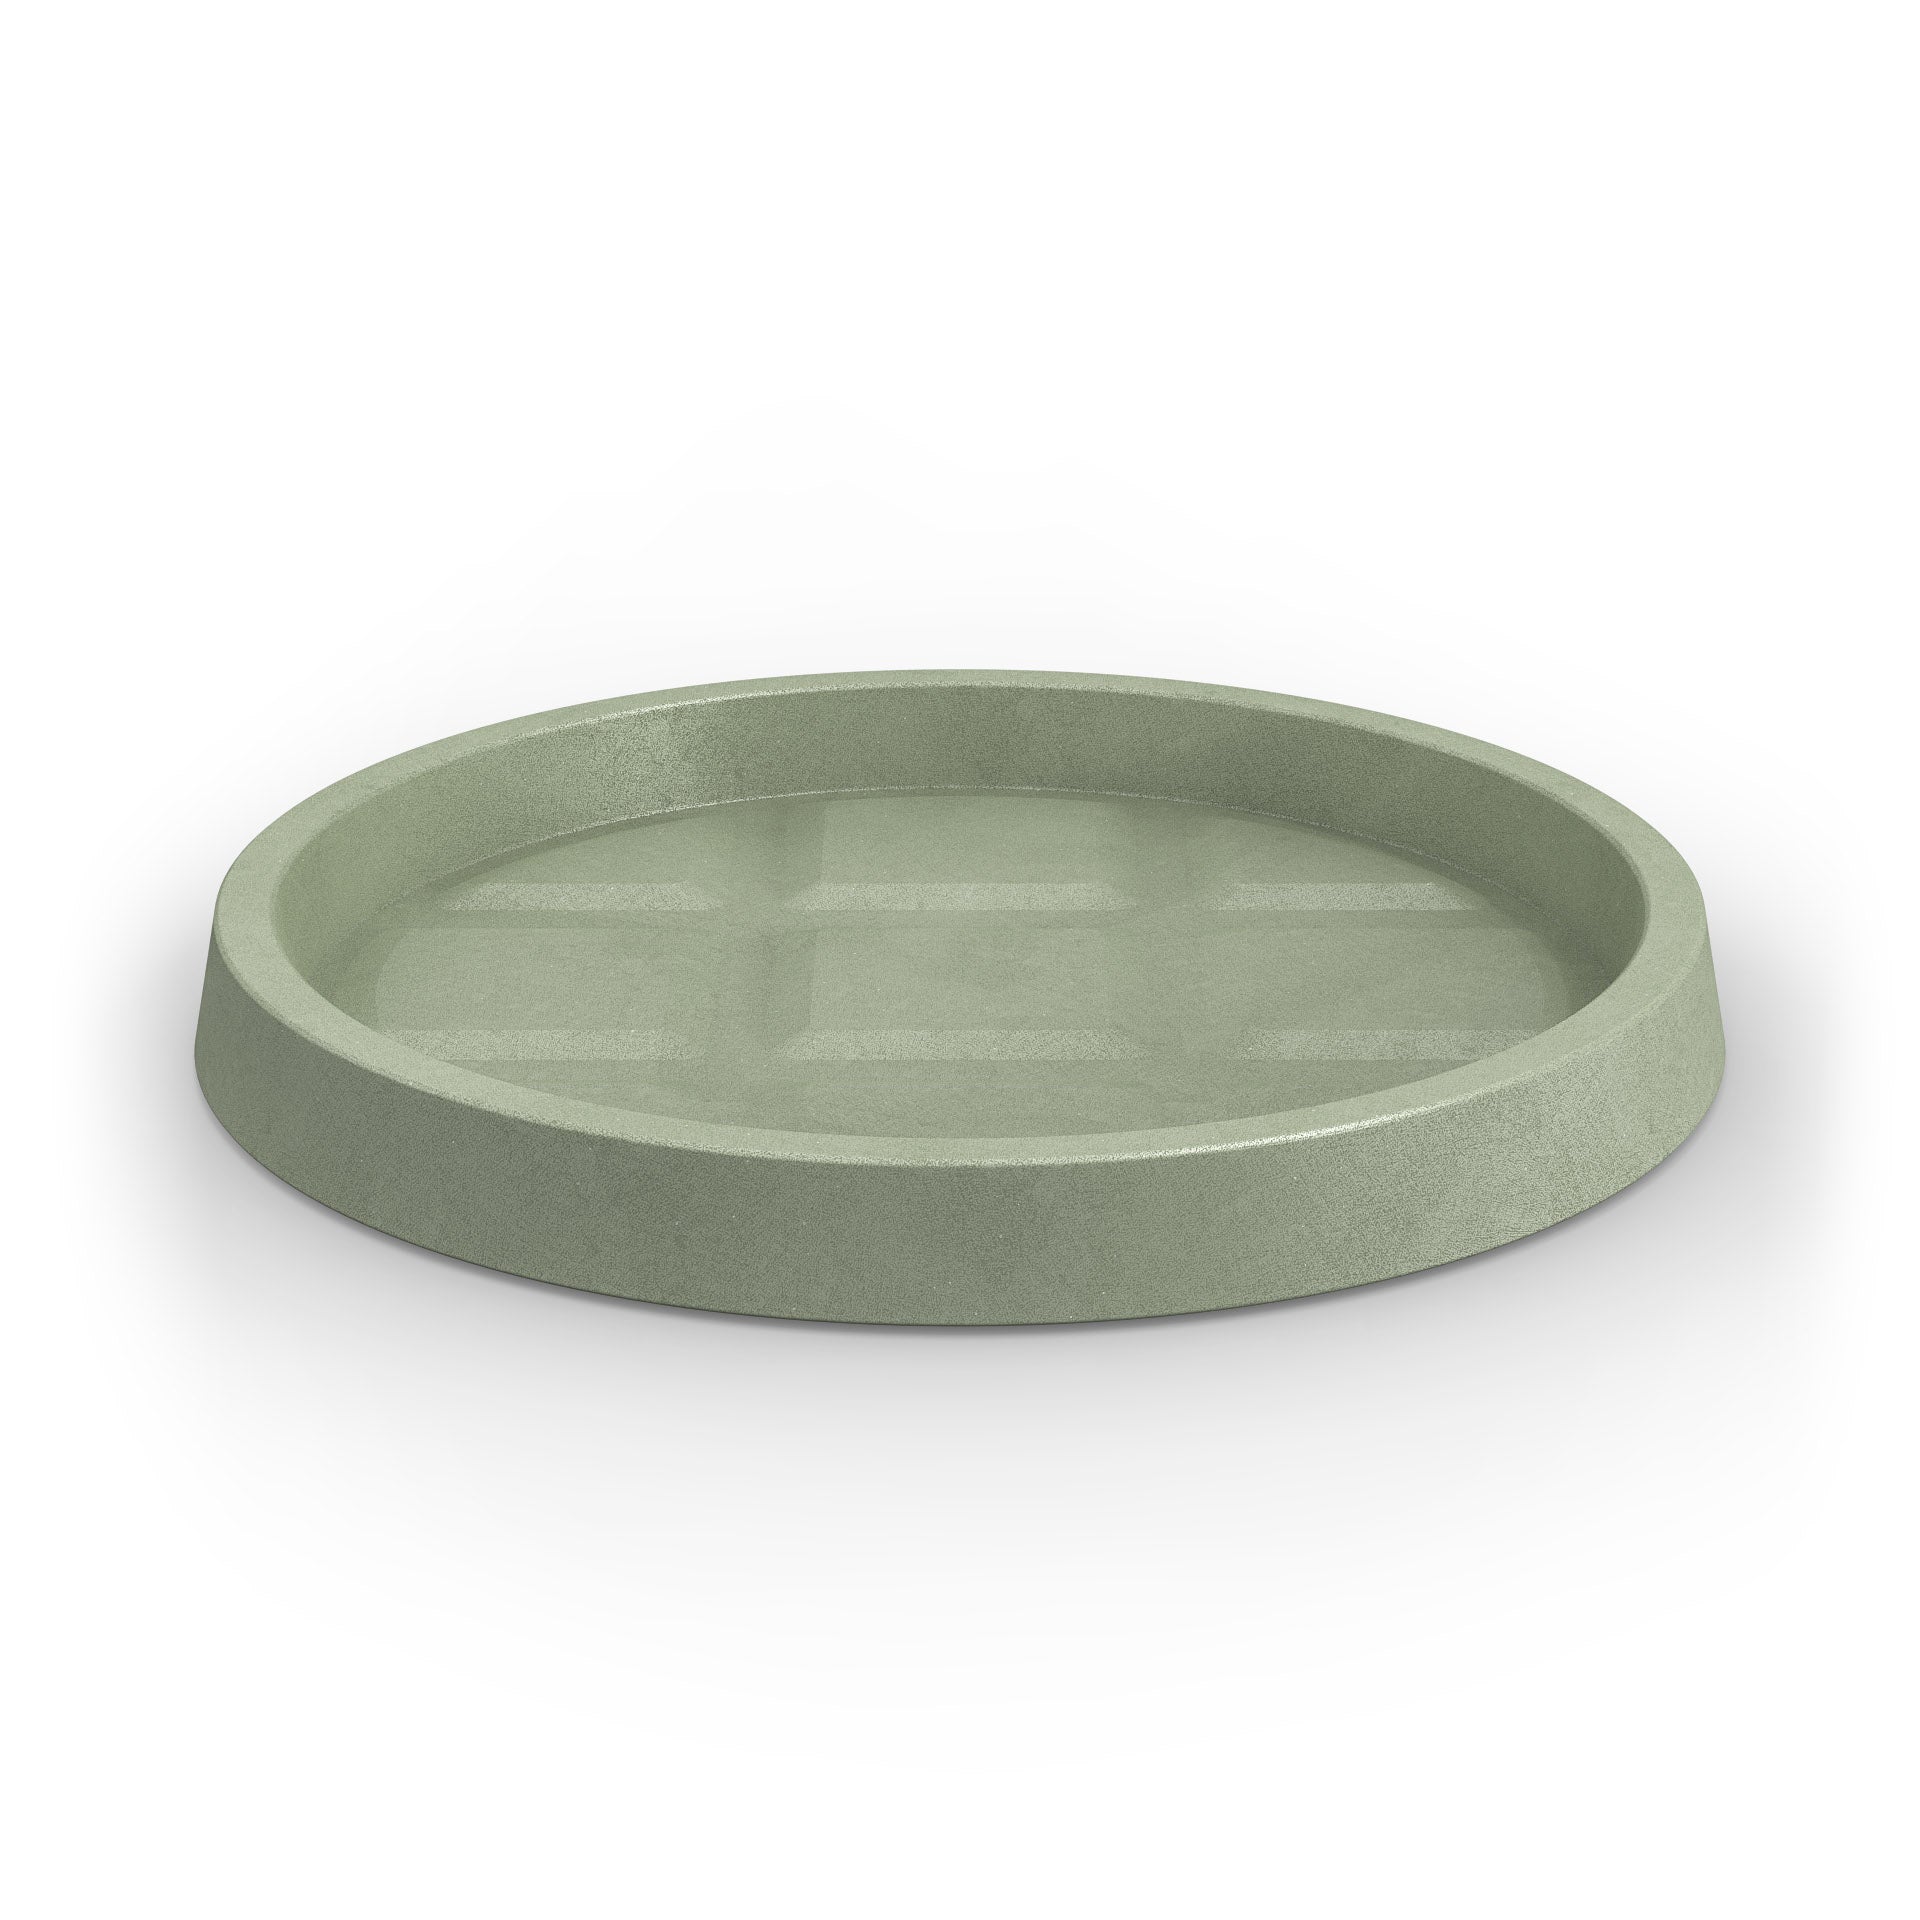 A pastel green saucer for Modscene planters. Made in New Zealand.